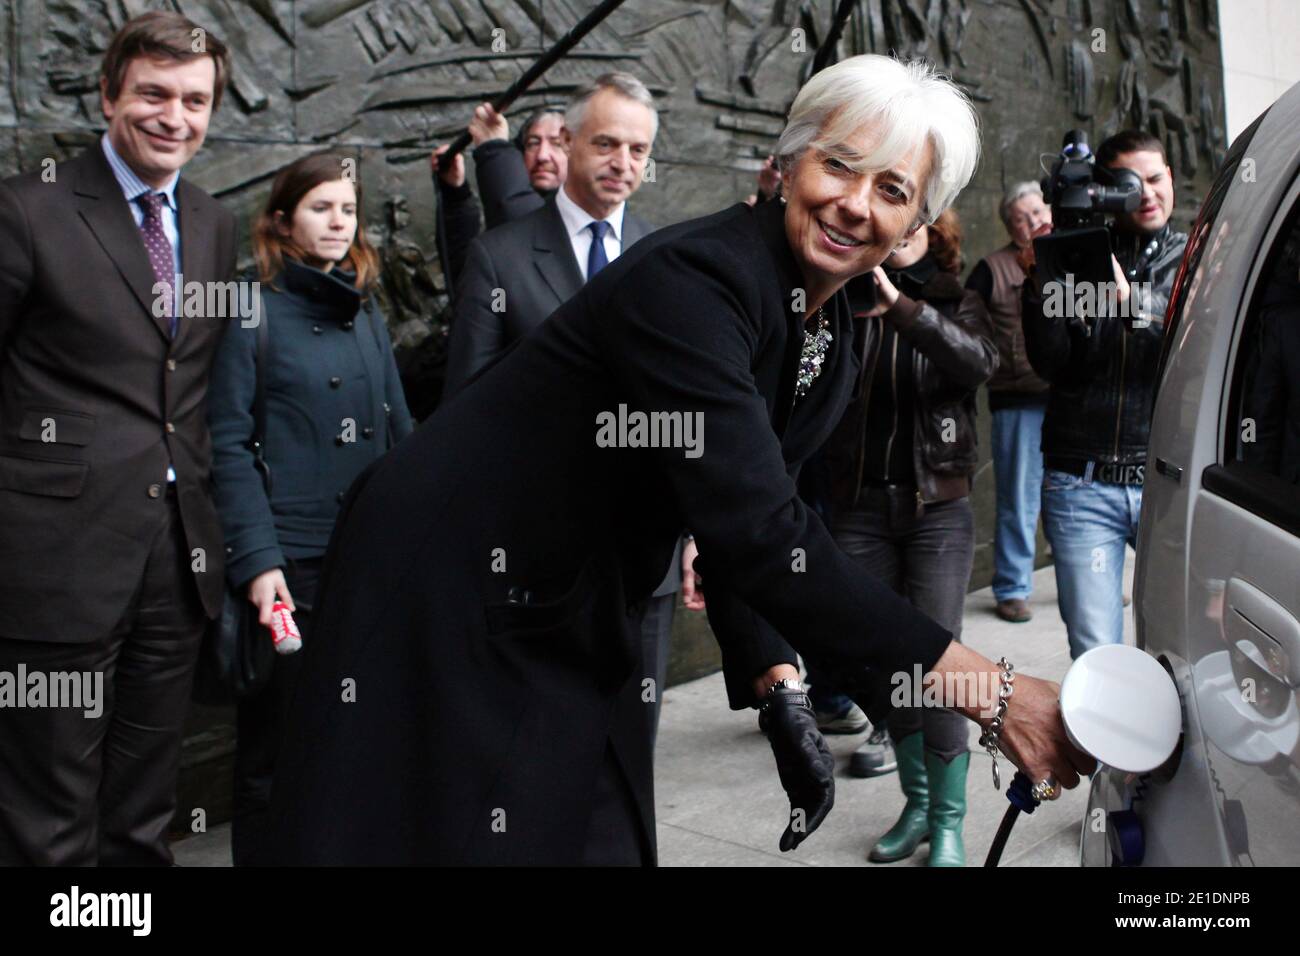 French Minister for the Economy, Finance and Industry Christine Lagarde shows how to charge the batteries of an Ion Peugeot full electric car near Peugeot Managing Director Vincent Rambaud, in Paris, France, on January 20, 2011. The Economy ministry will use the four seat four-door city ion car, launched at the end of 2010. Photo by Stephane Lemouton/ABACAPRESS.COM Stock Photo